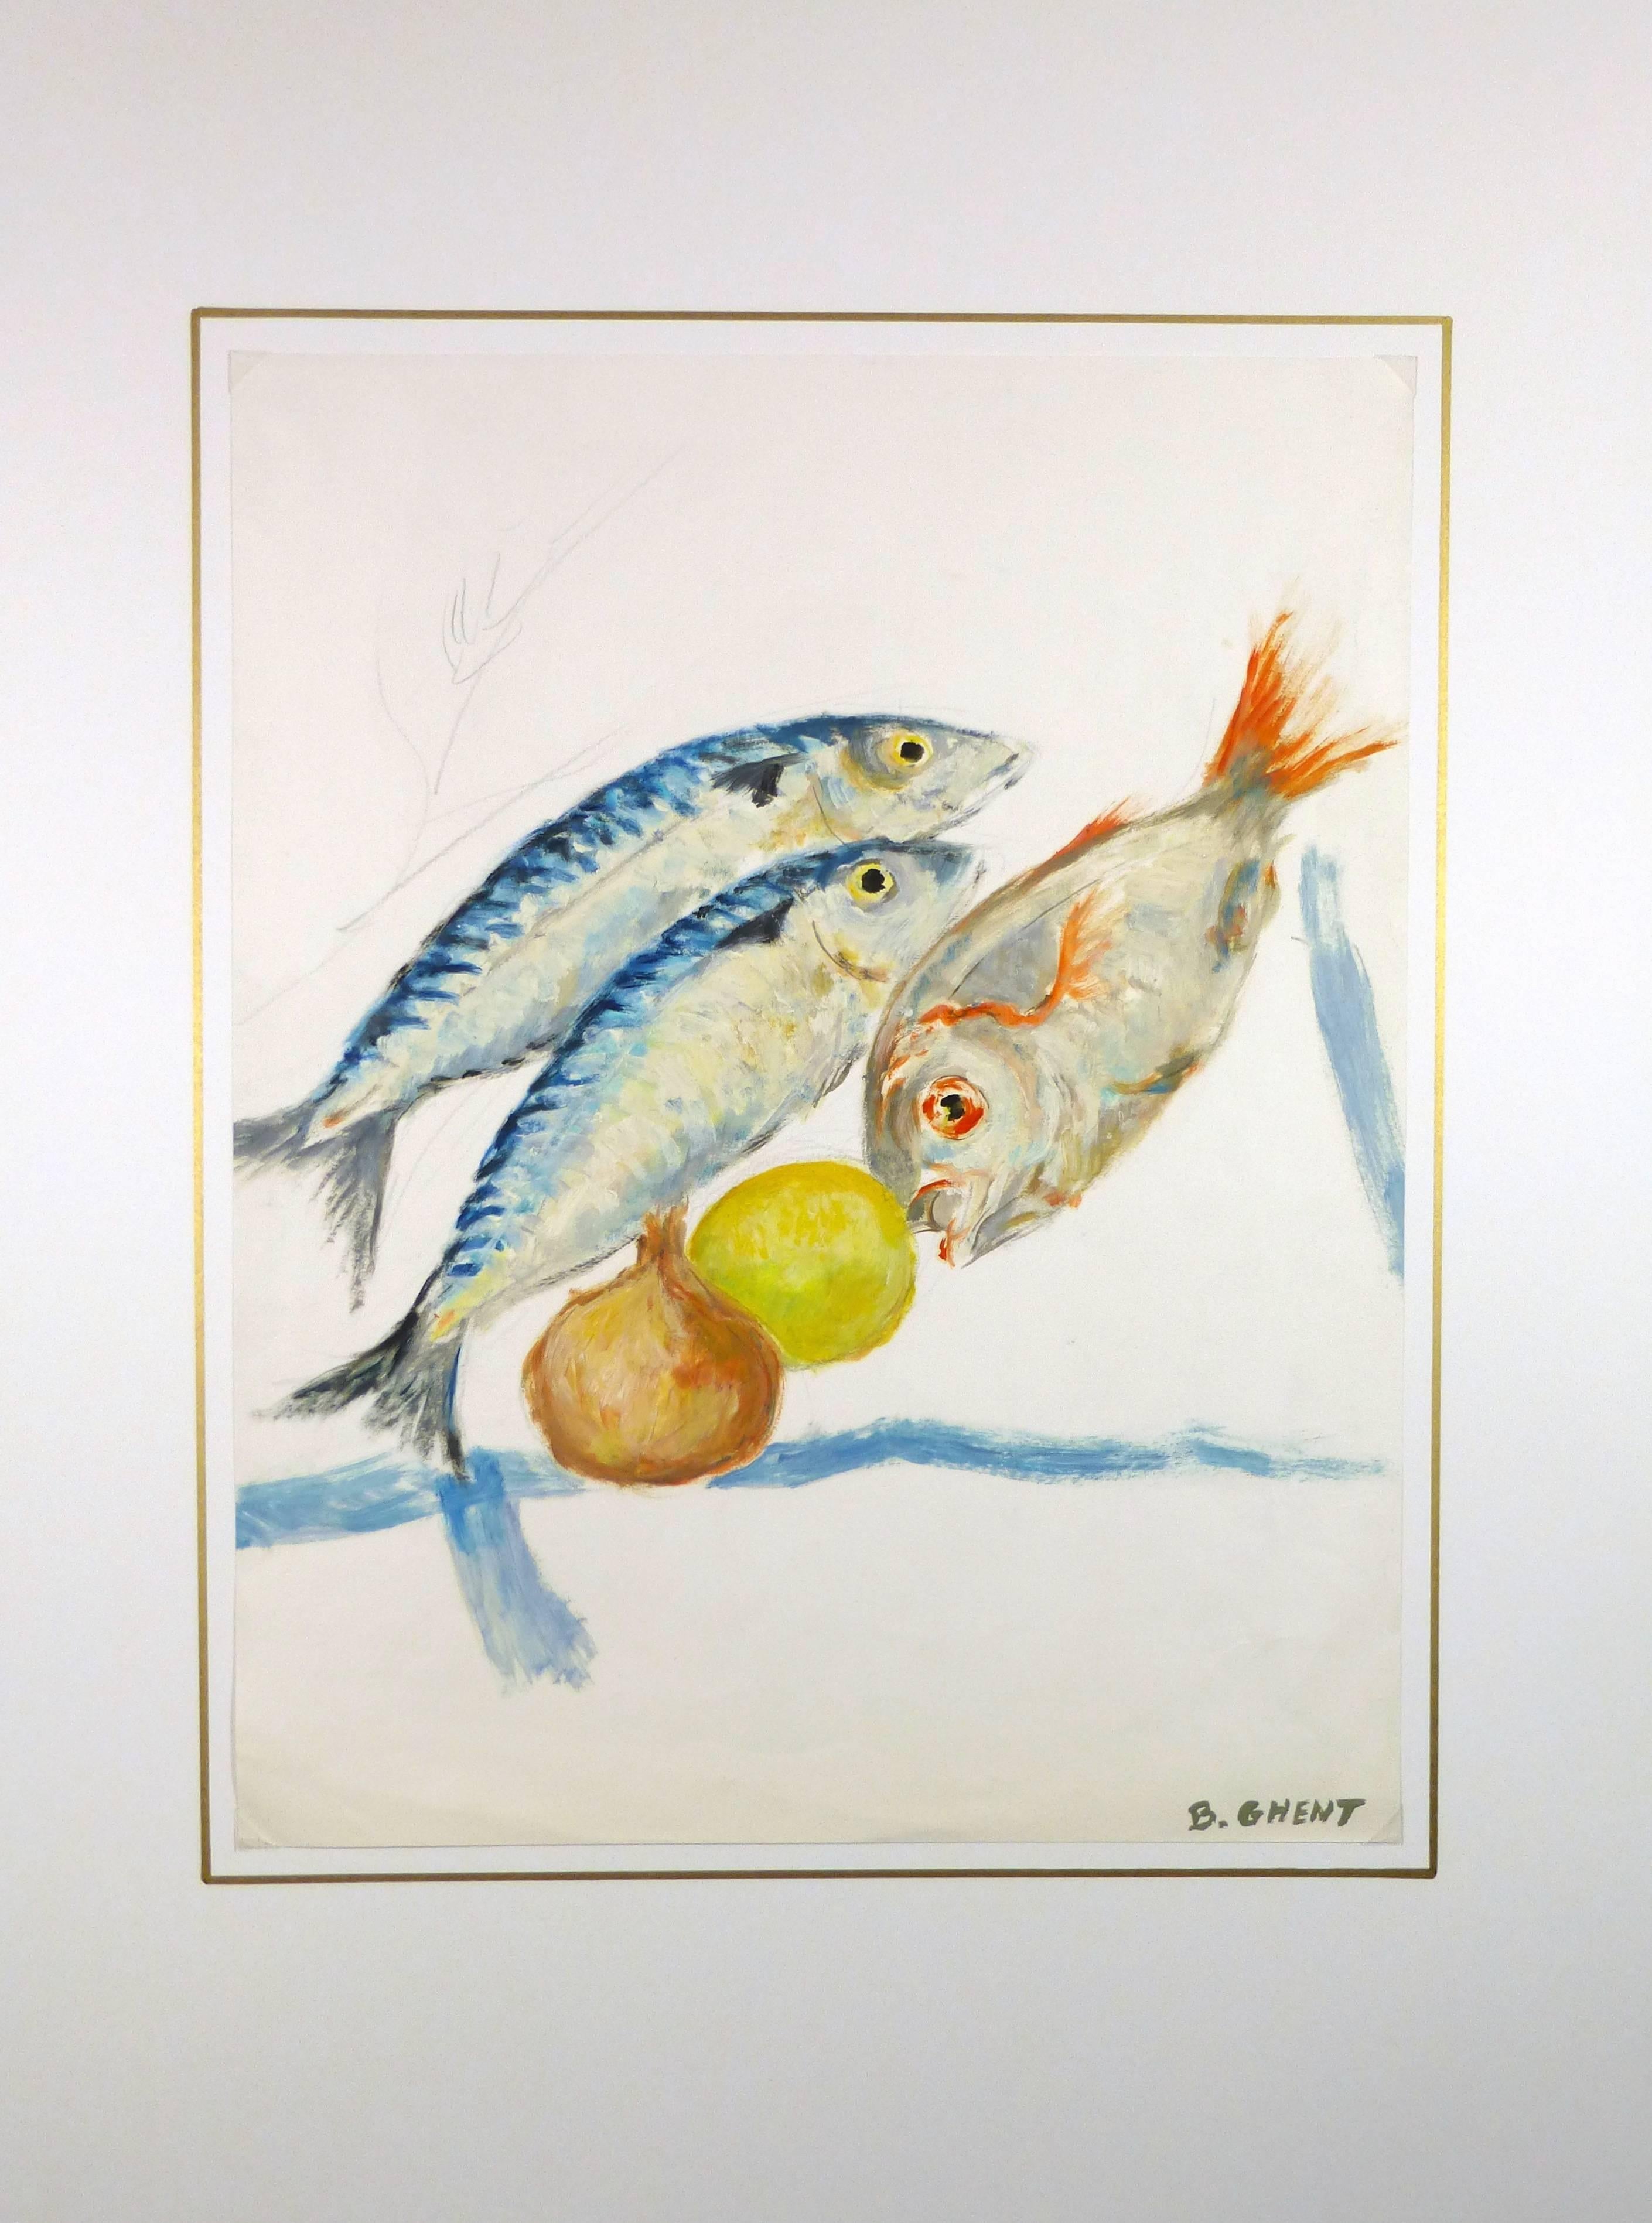 Belgian oil painting on paper of trio of fish, two in blueish silver tones and one with orange gold tones with raw onion and lemon, 1990s. Signed lower right.  

Original artwork on paper displayed on a white mat with a gold border. Archival plastic